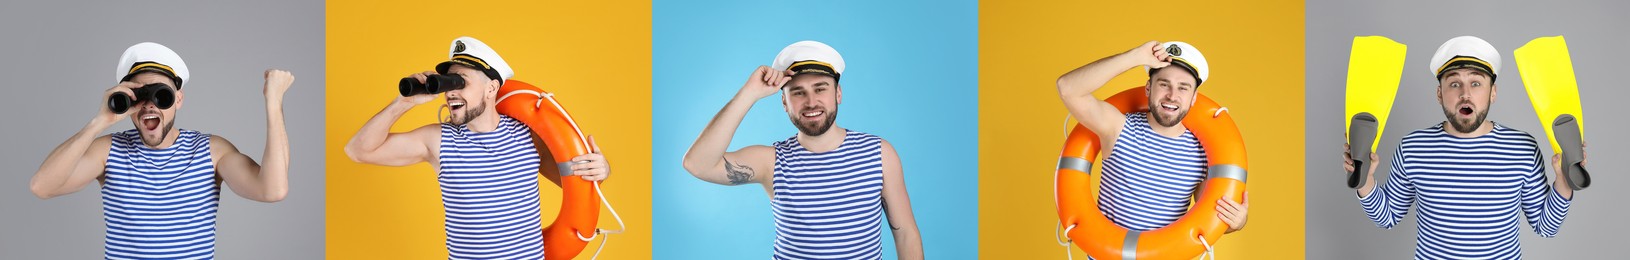 Image of Collage with photos of sailors on different color backgrounds